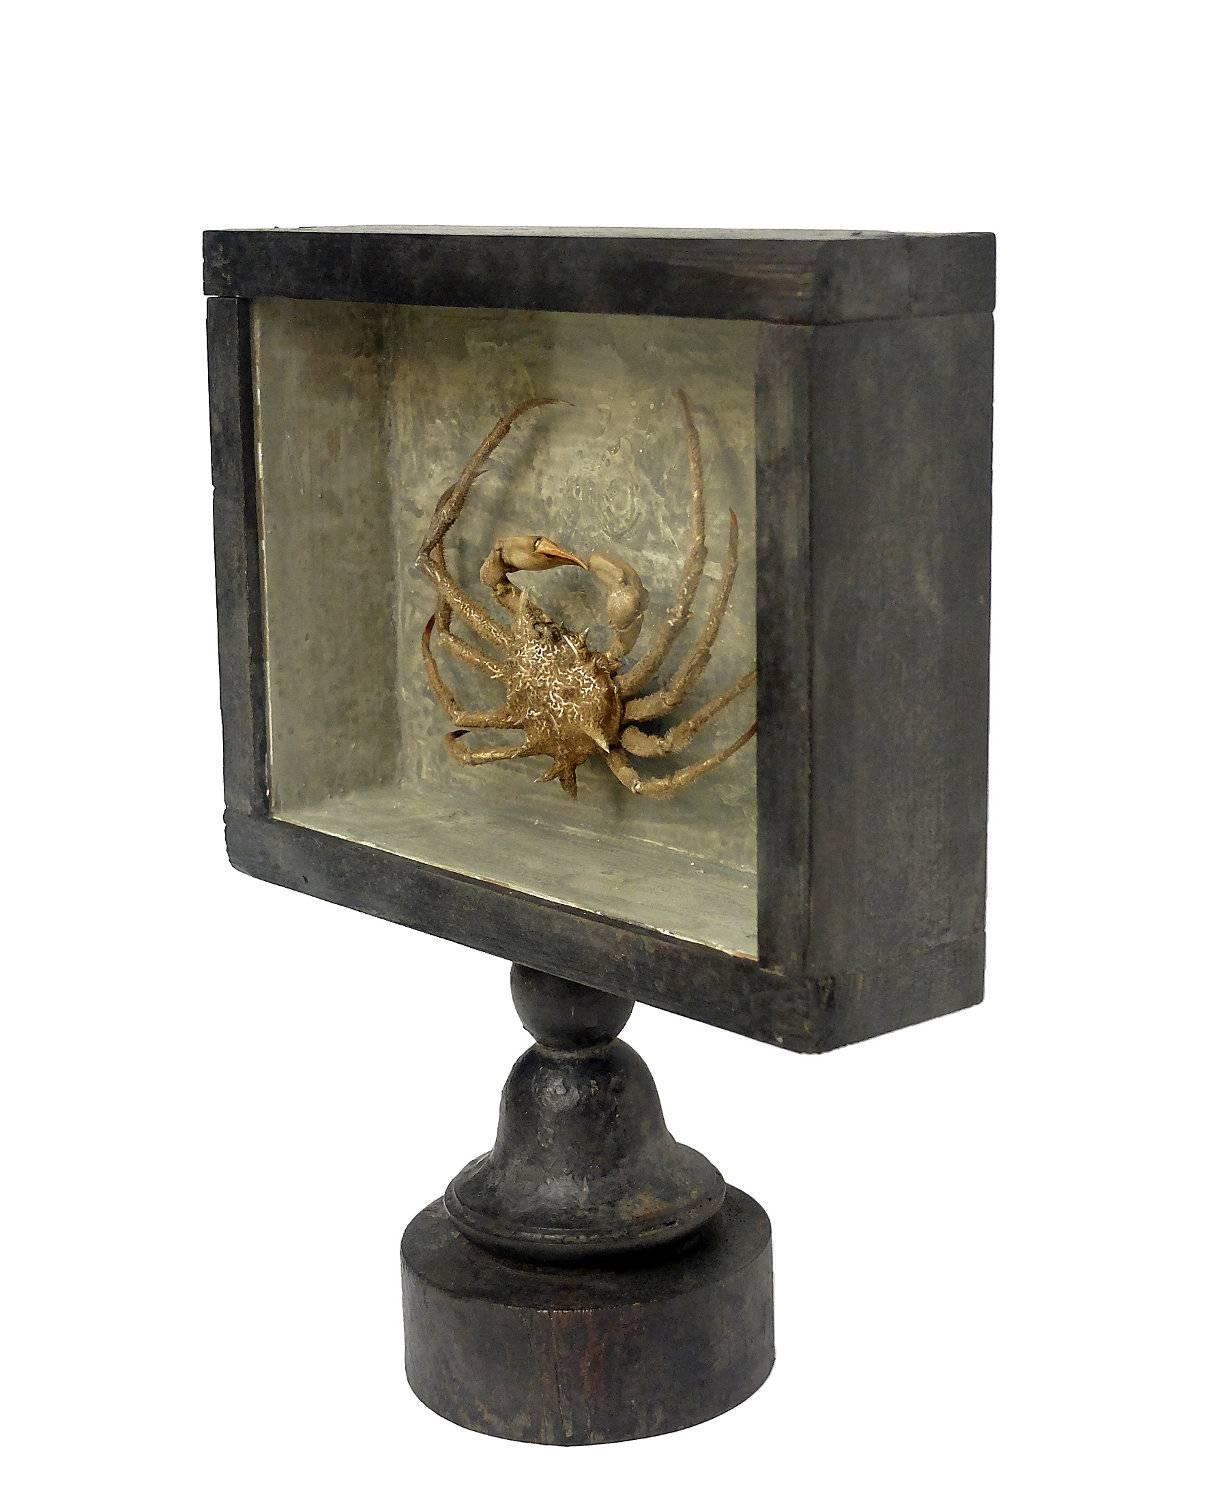 A rare marine natural wunderkammer specimen of a white crab the specimen is stuffed and mounted inside a painted black wooden show case with glass.